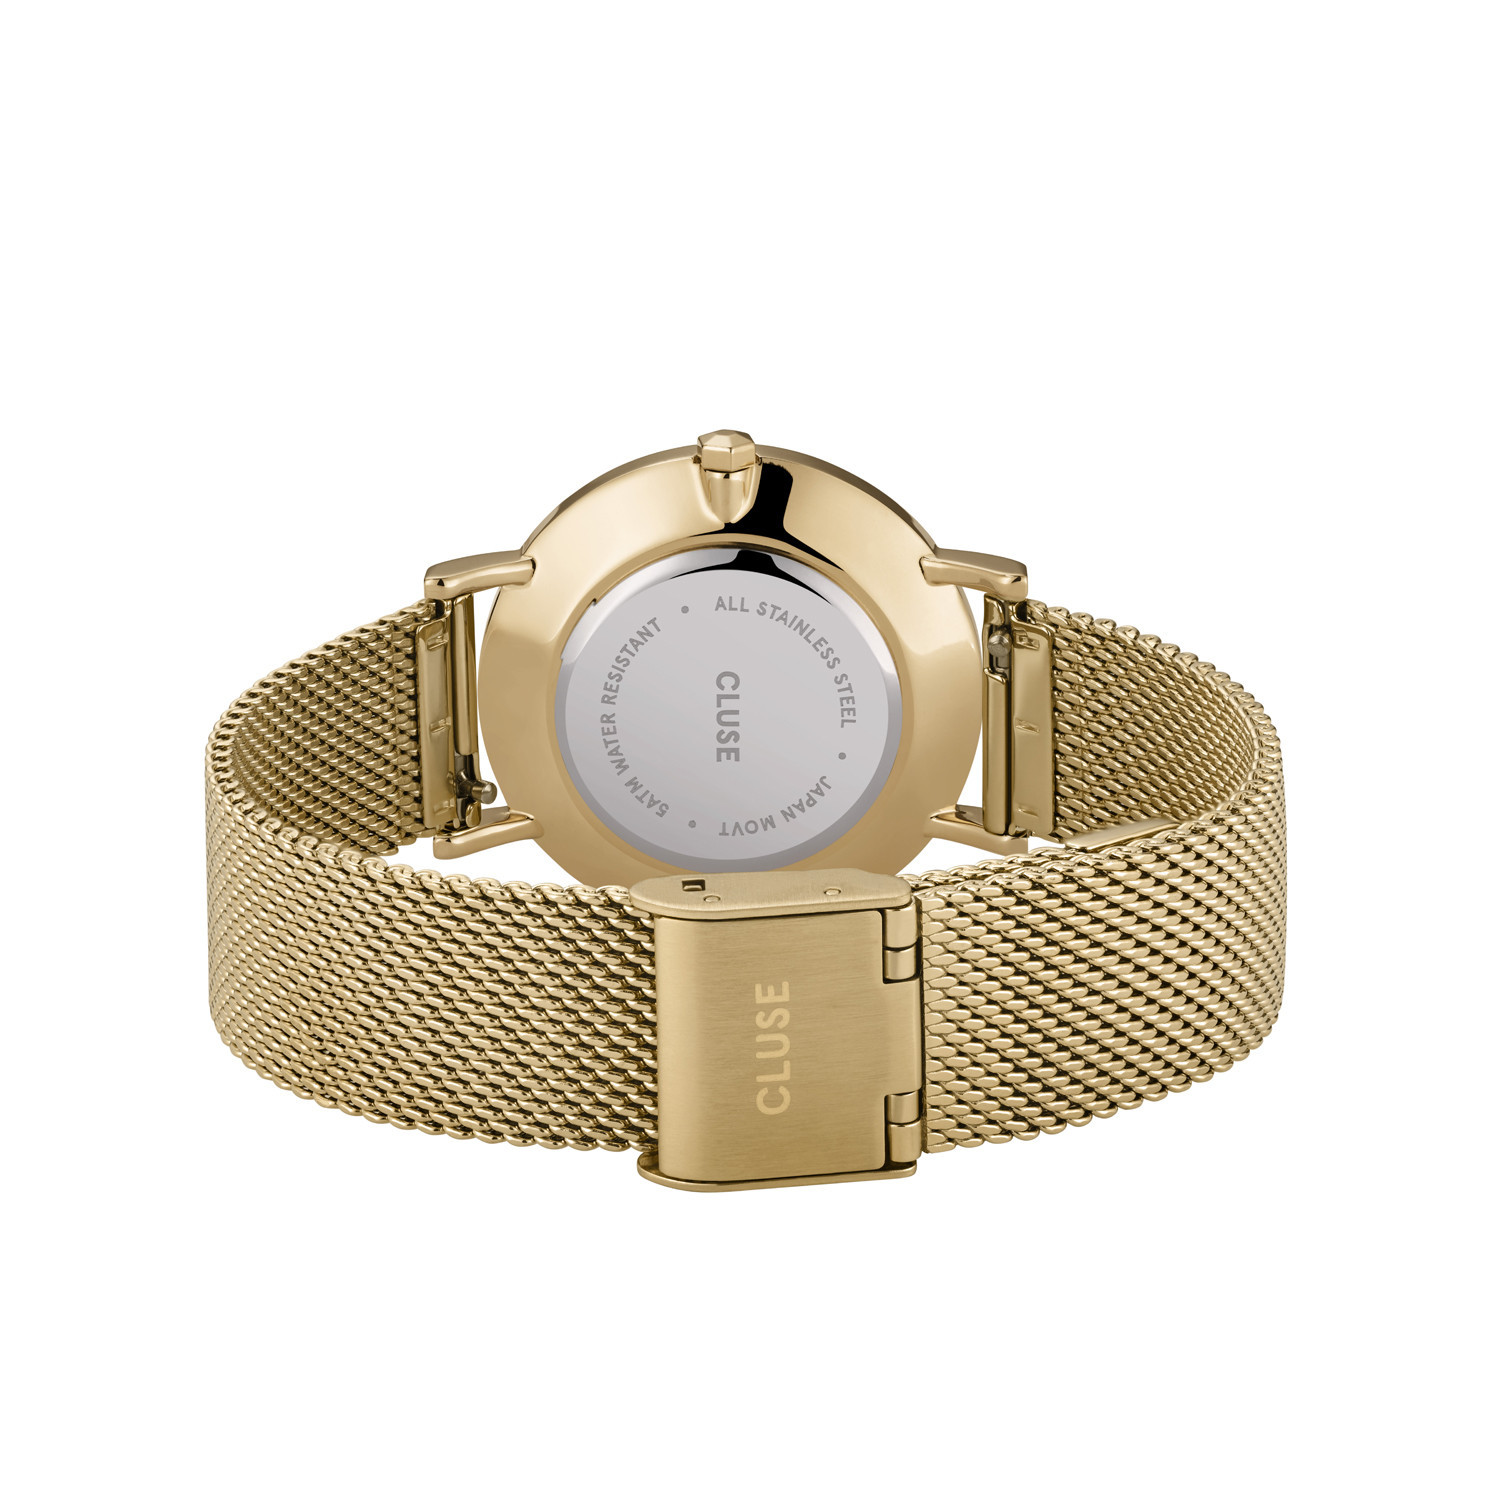 Montre femme Cluse Minuit gold stone green/gold